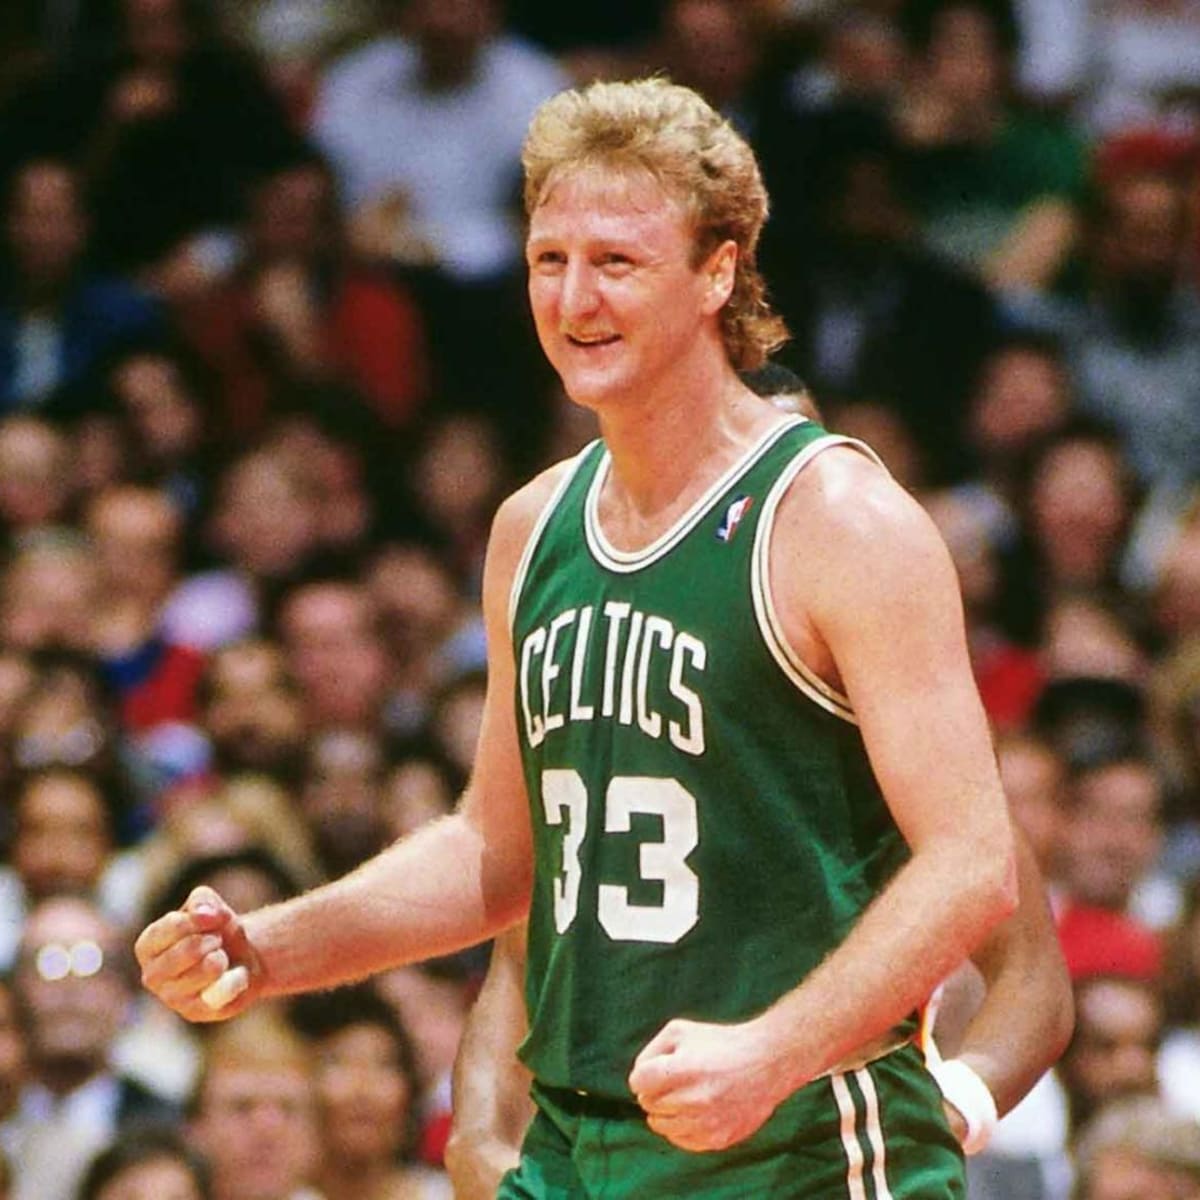 WATCH: Making the case for Boston Celtics legend Larry Bird as the